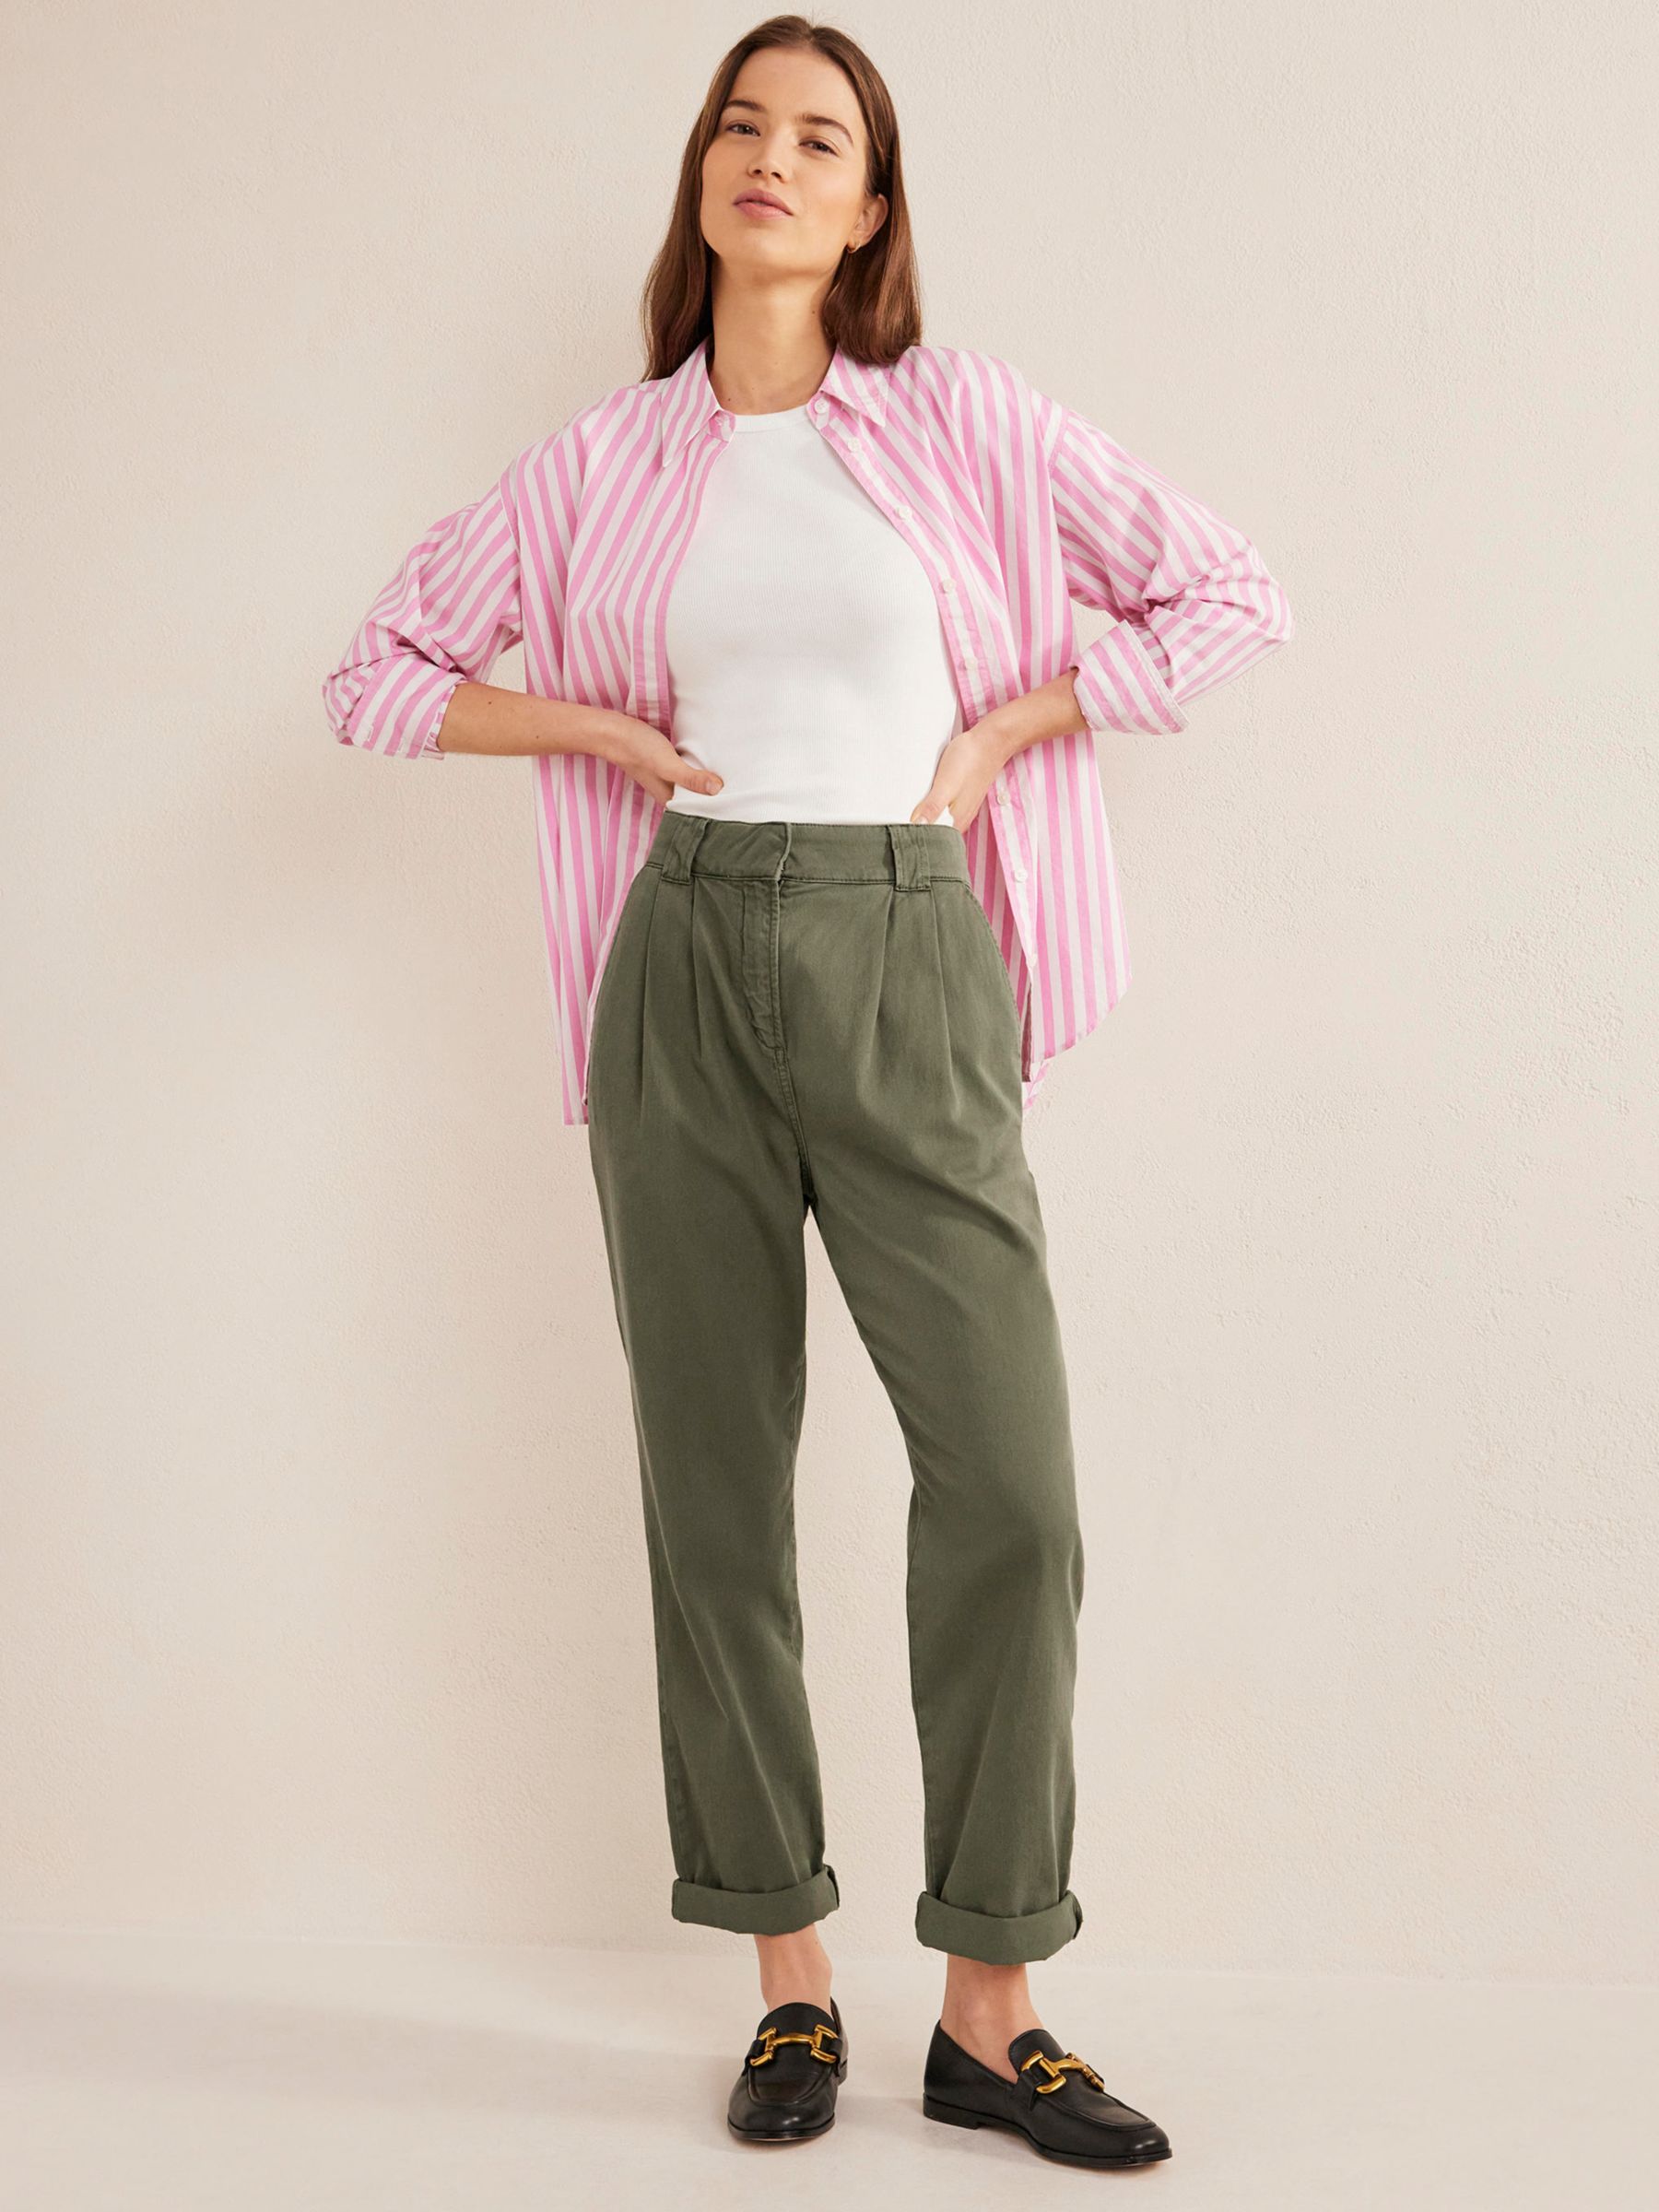 Boden Casual Twill Trousers, Kale